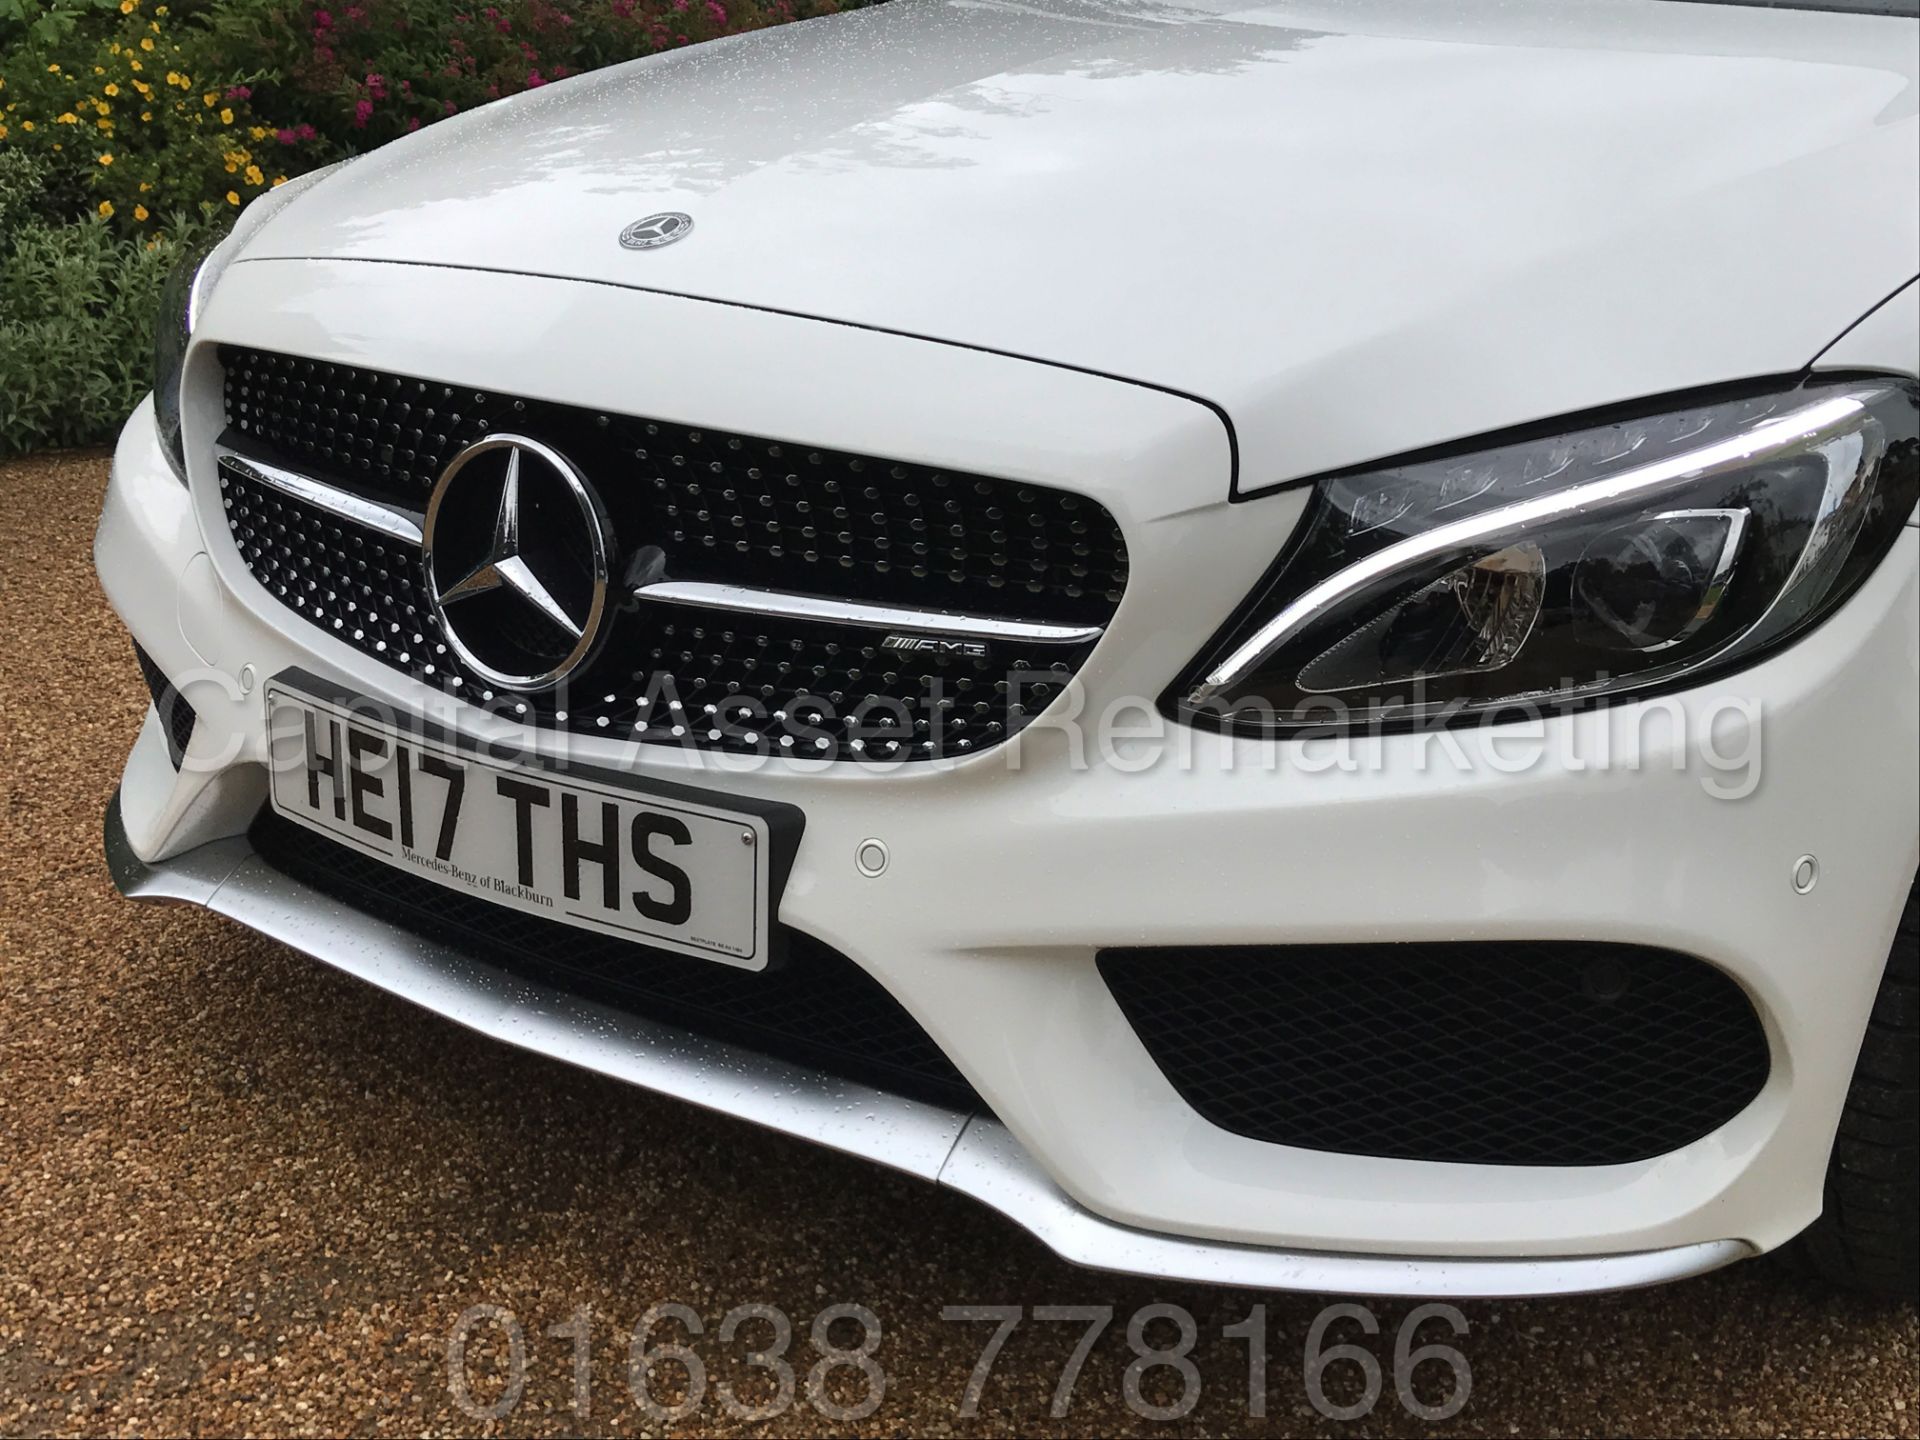 MEREDES-BENZ C43 AMG PREMIUM '4 MATIC' COUPE (2017) '9-G AUTO - LEATHER - SAT NAV' **FULLY LOADED** - Image 20 of 57